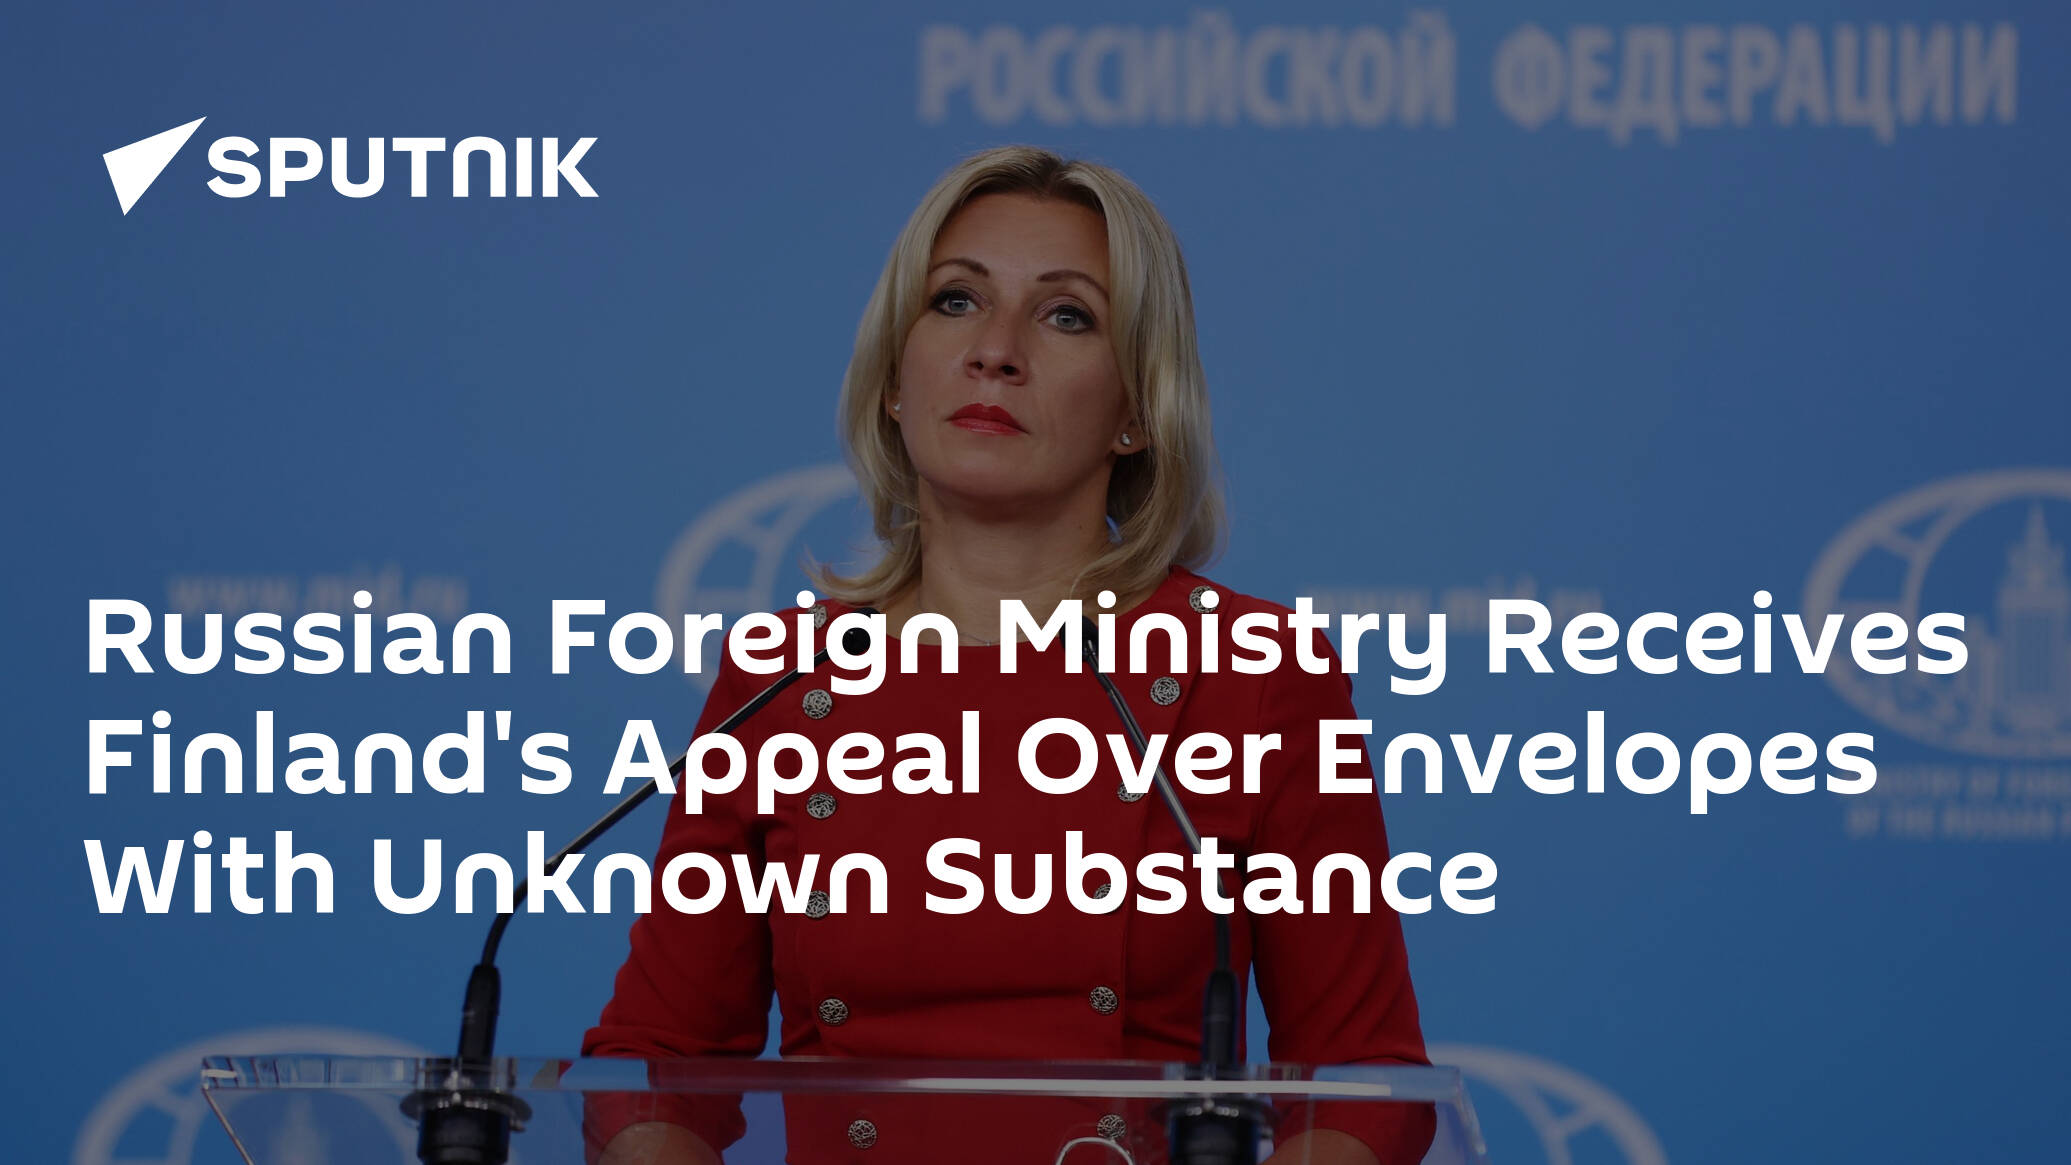 Russian Foreign Ministry Receives Finland's Appeal Over Envelopes With Unknown Substance